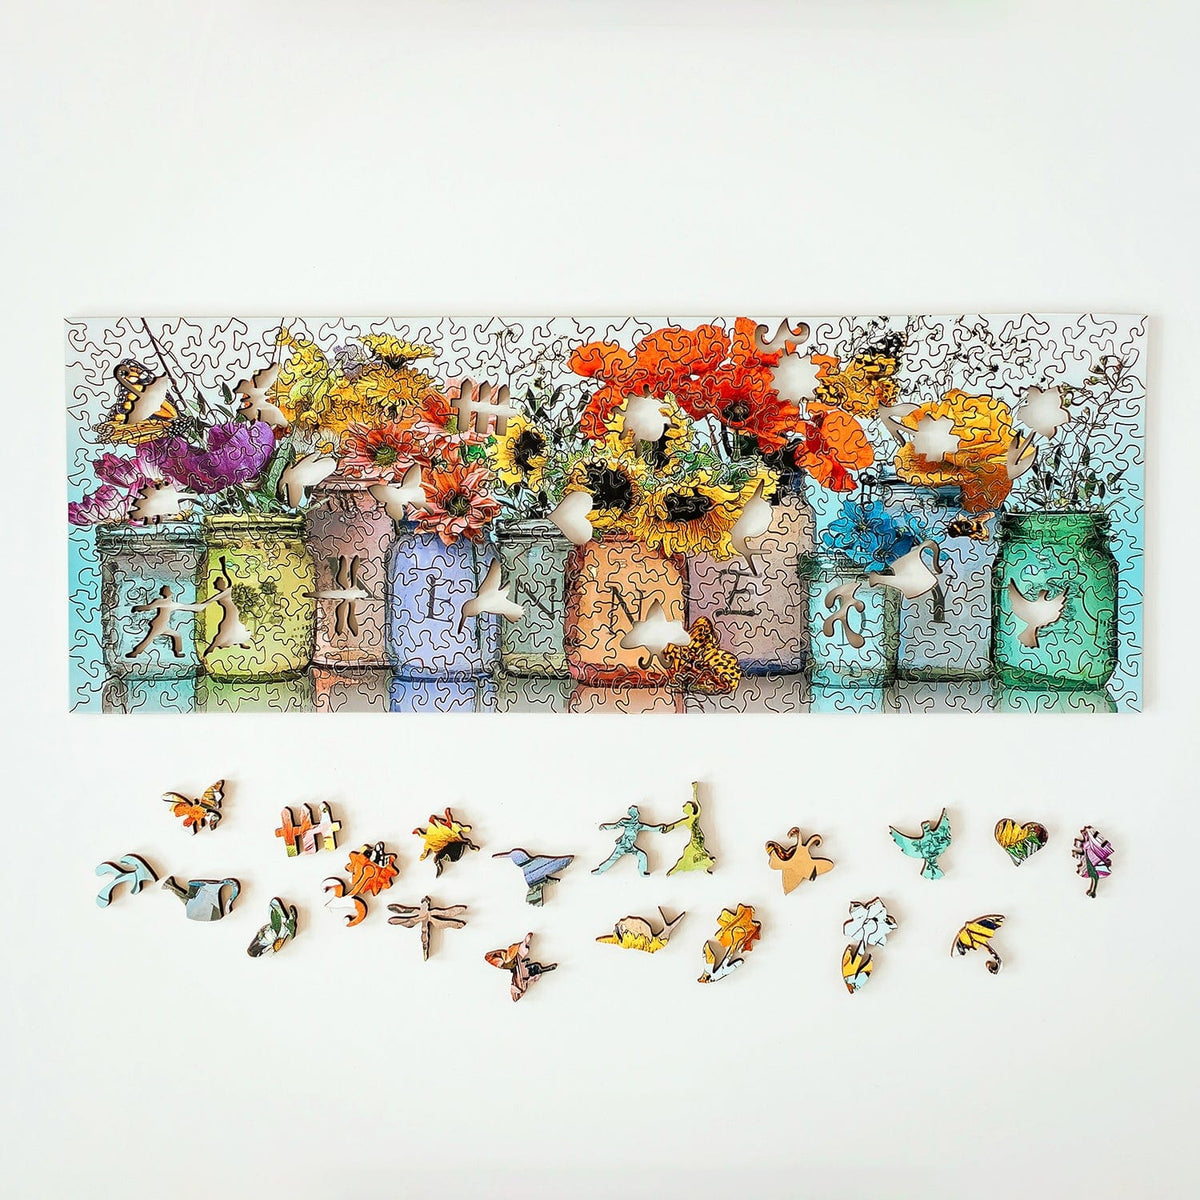 Personalized wooden jigsaw puzzle from Personal Prints